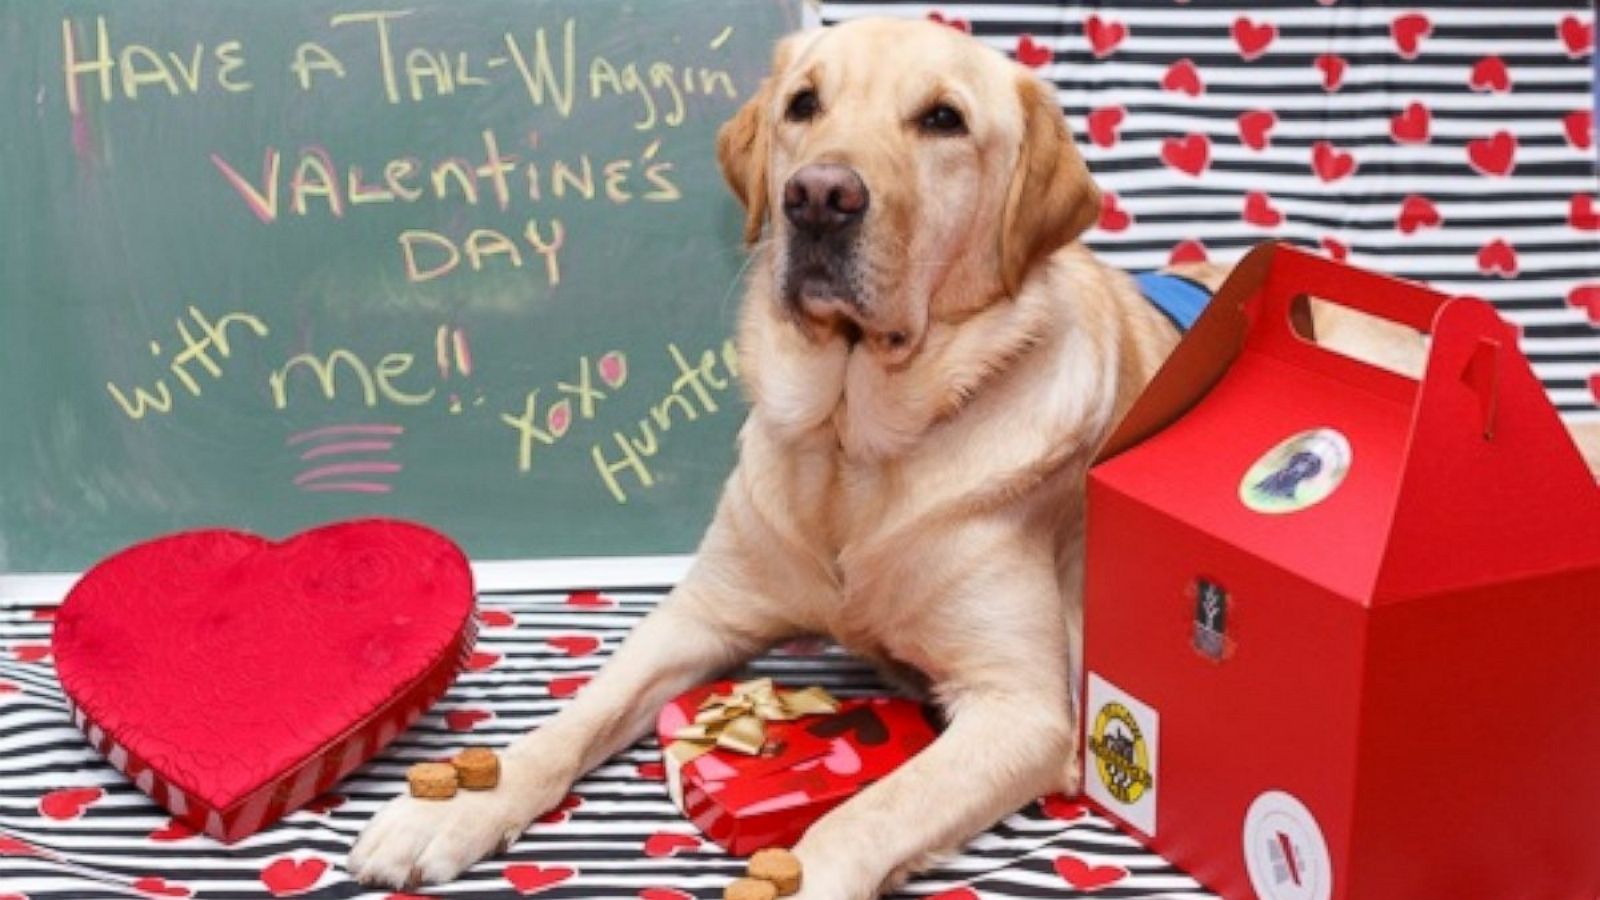 Service dogs trained by inmates deliver Valentine's Day treats